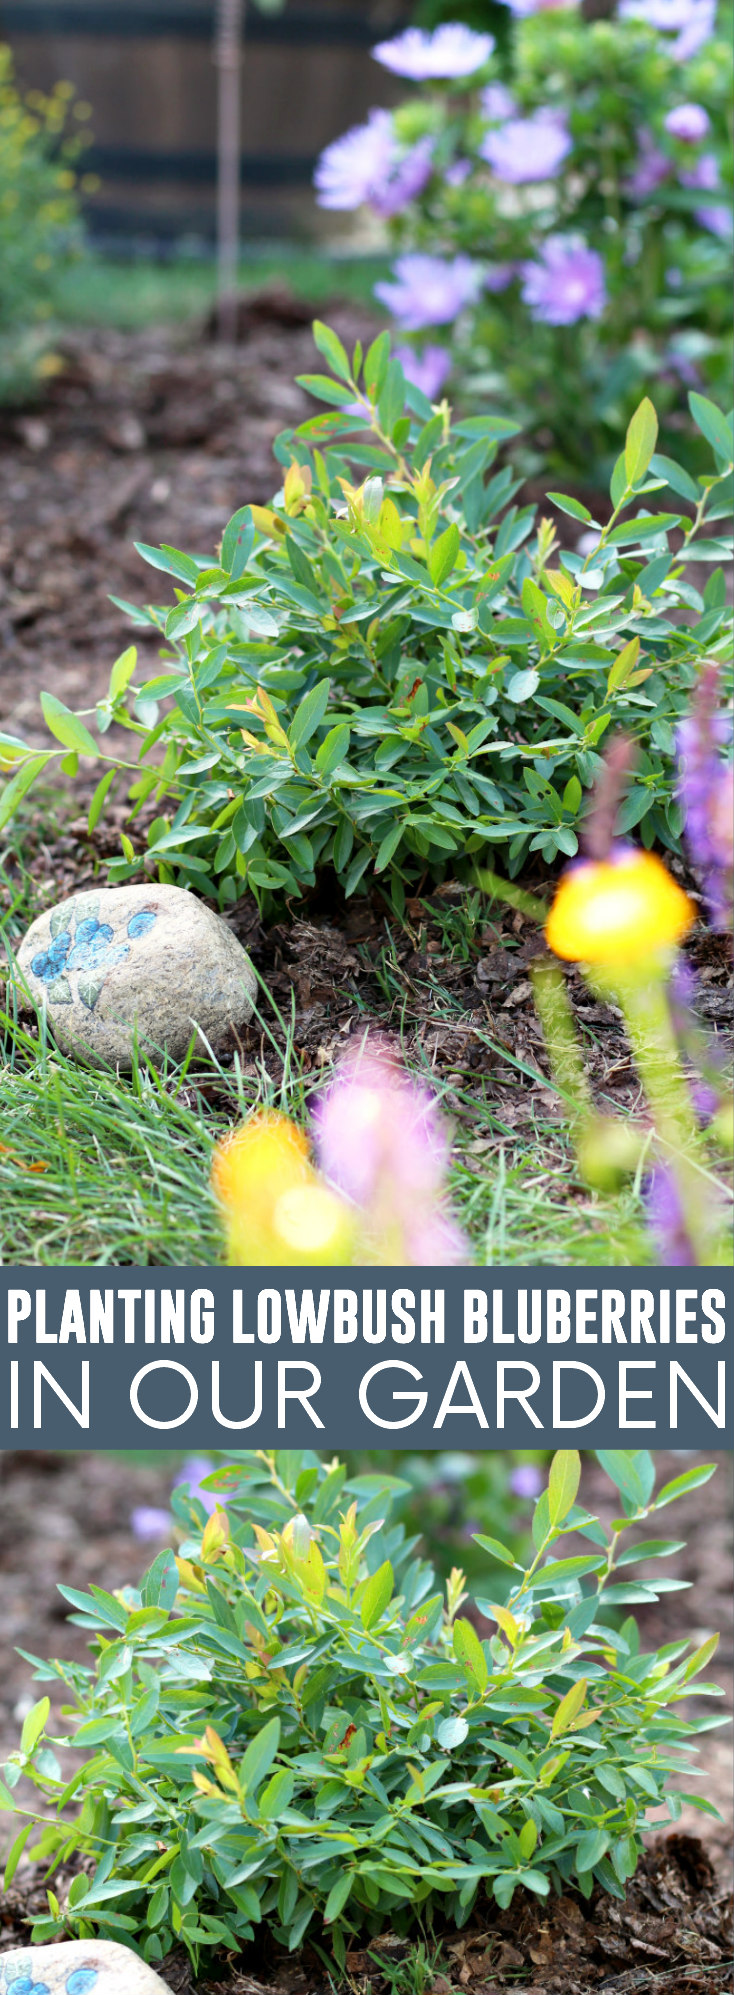 Planting Lowbush Blueberries in Our Garden pinnable image.